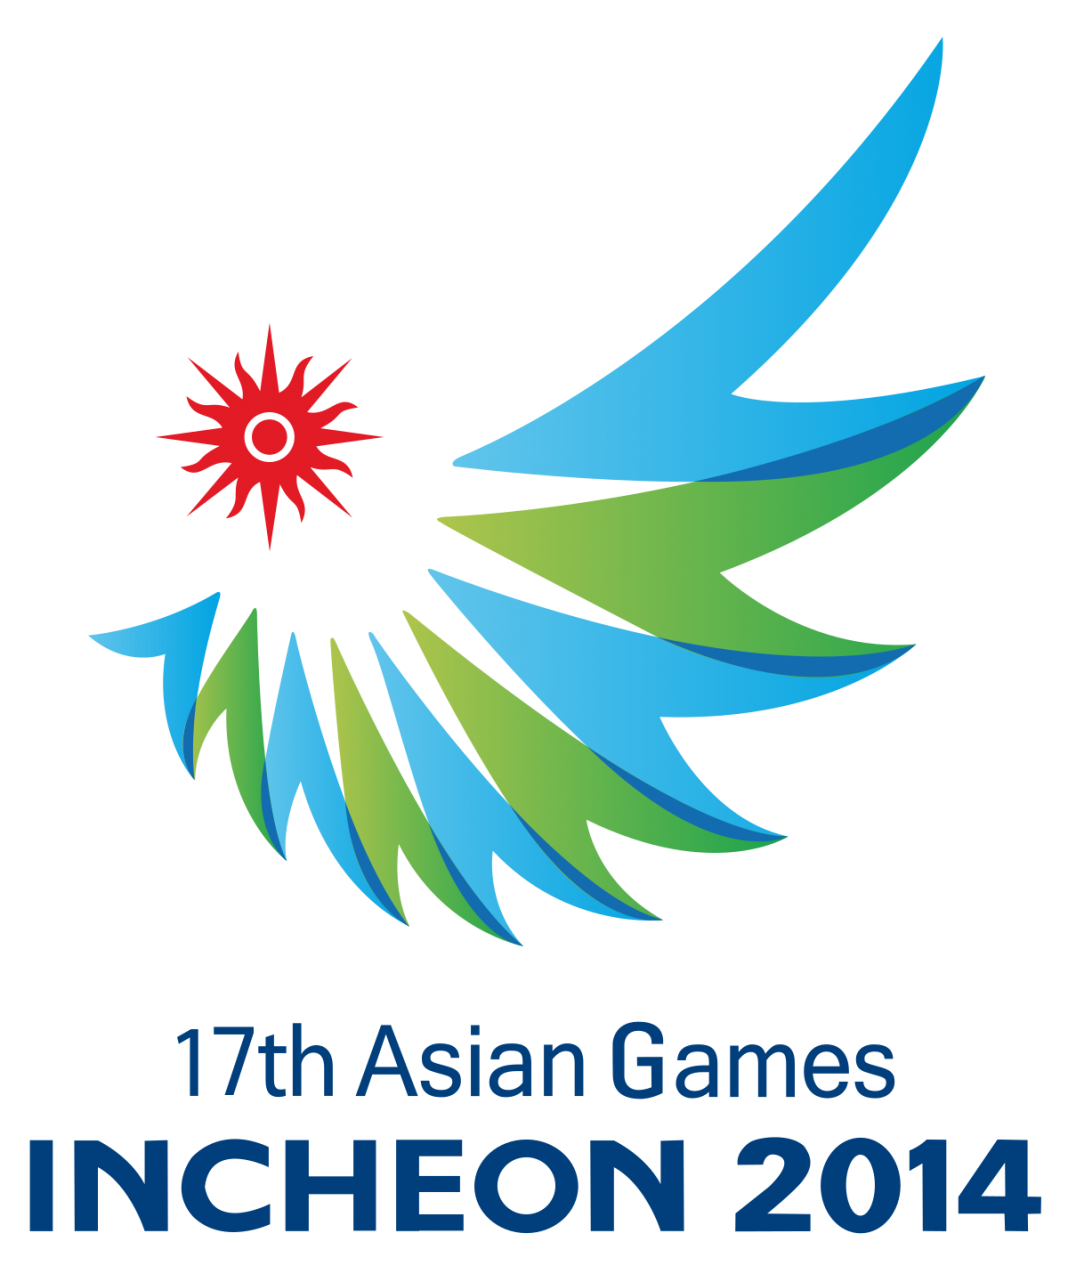 All the Details you want to know about Asian Games